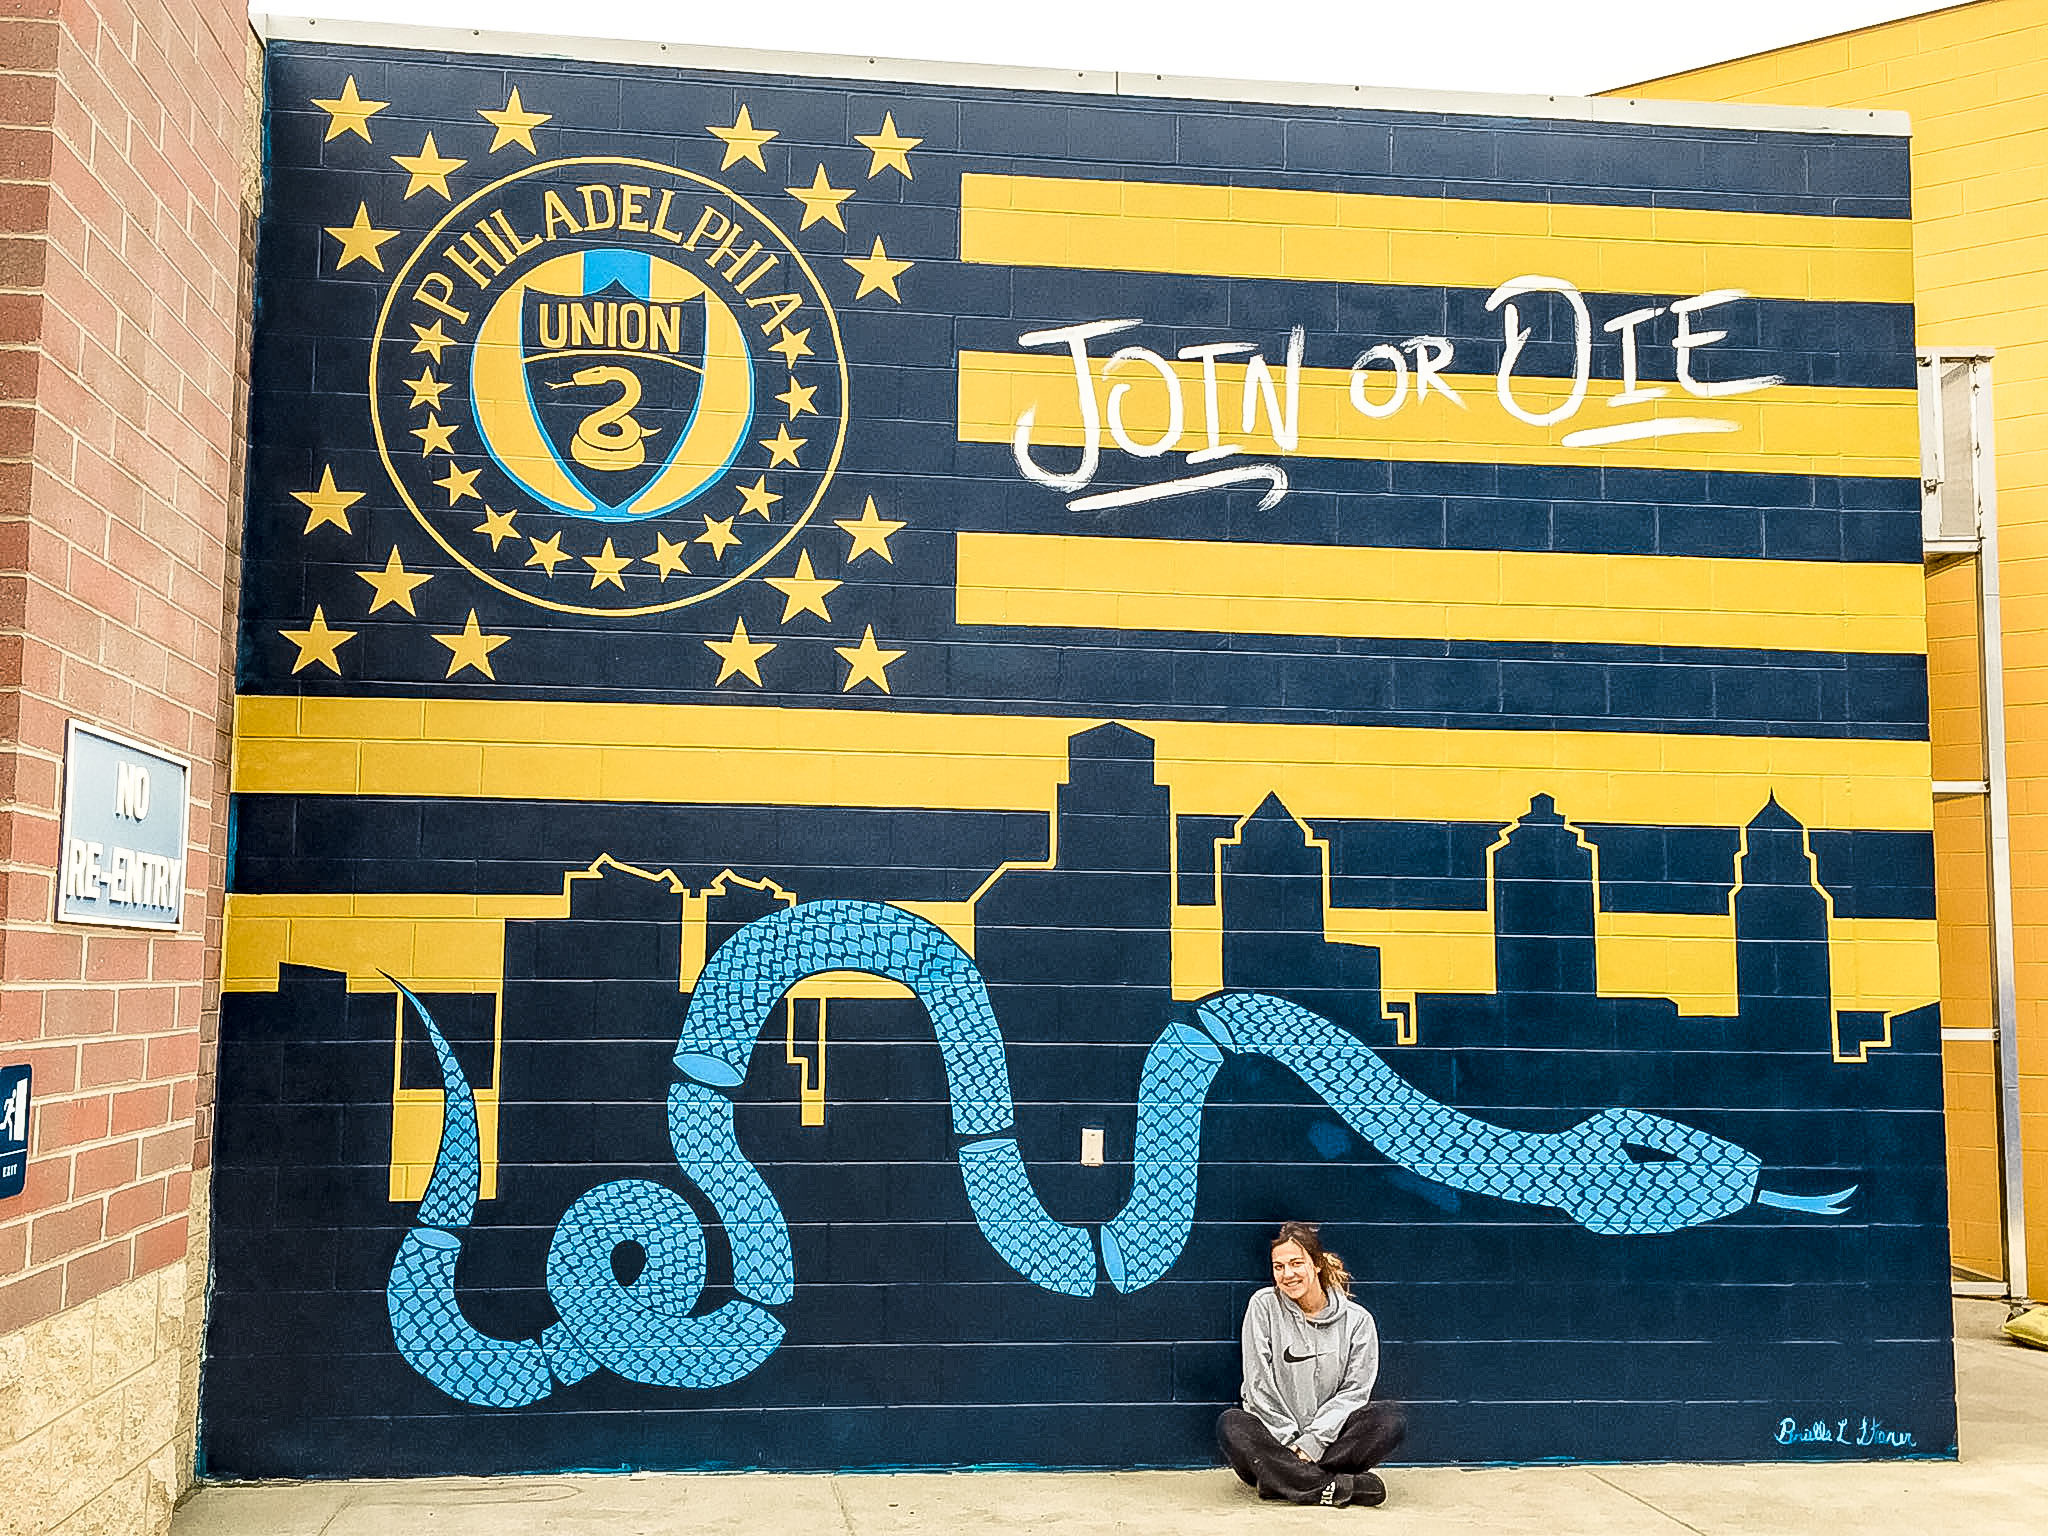 2048x1536 And at the River Gate, a Union flag mural is present, painted by the Union  Fan Council, and is complete with a Join or Die snake and the Philadelphia  Union ...